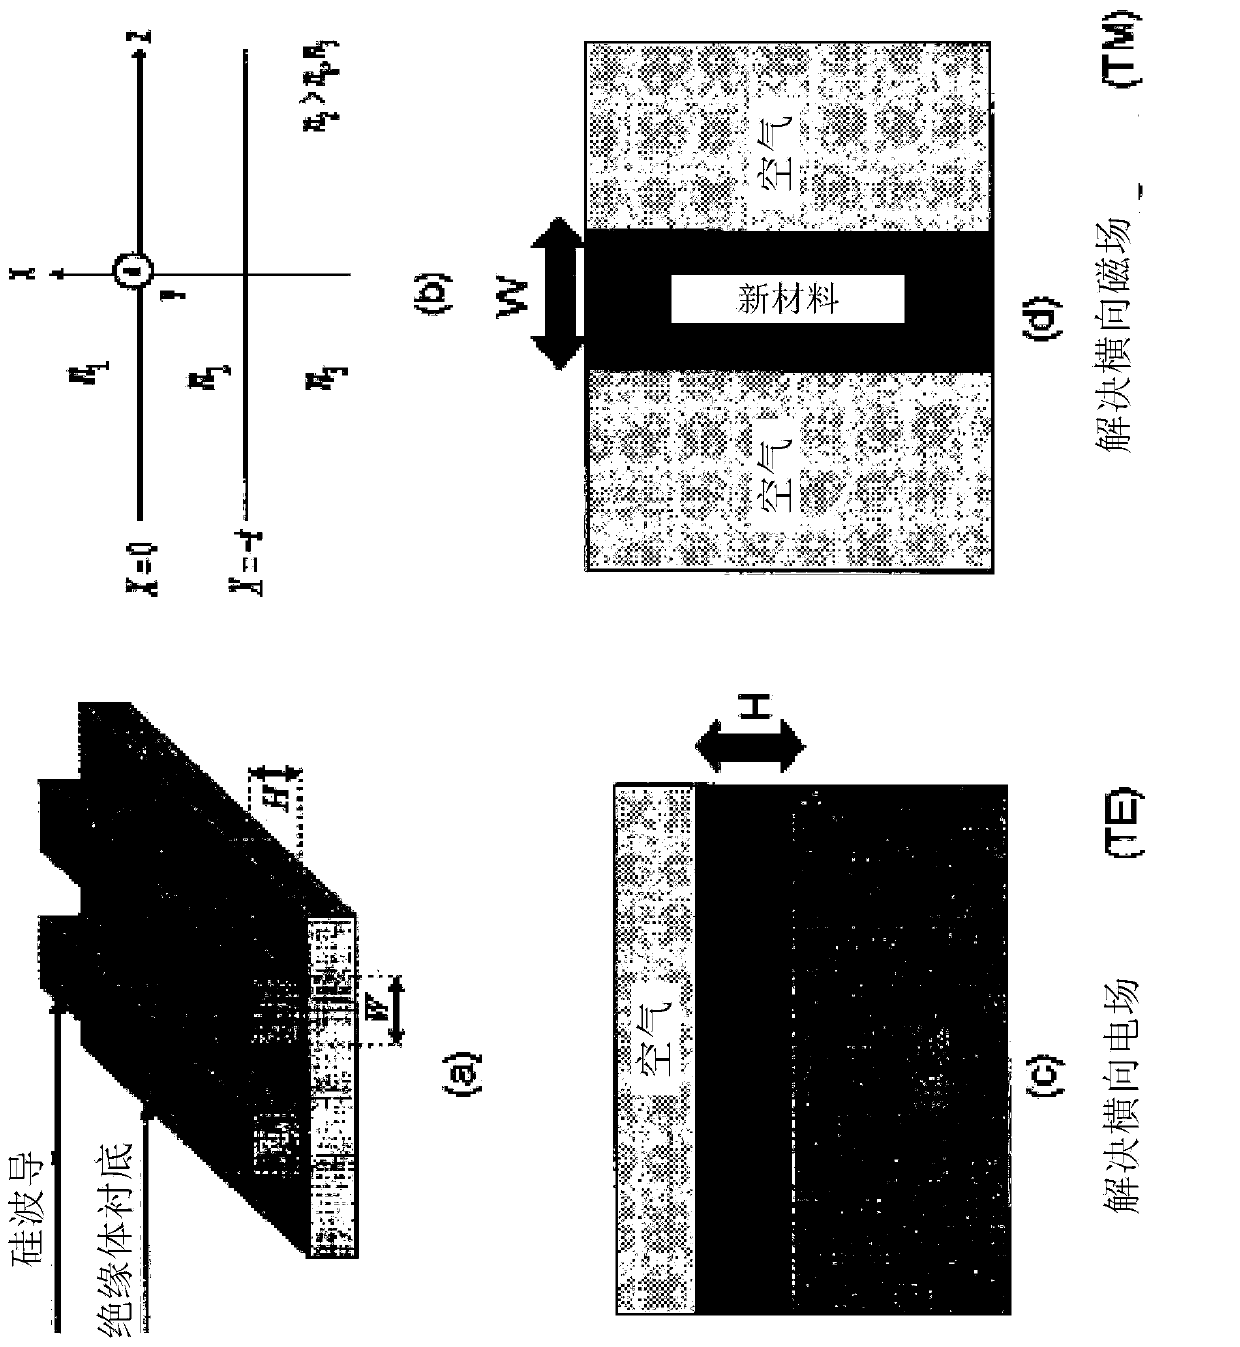 A fully integrated complementary metal oxide semiconductor (CMOS) fourier transform infrared (FTIR) spectrometer and raman spectrometer and method thereof